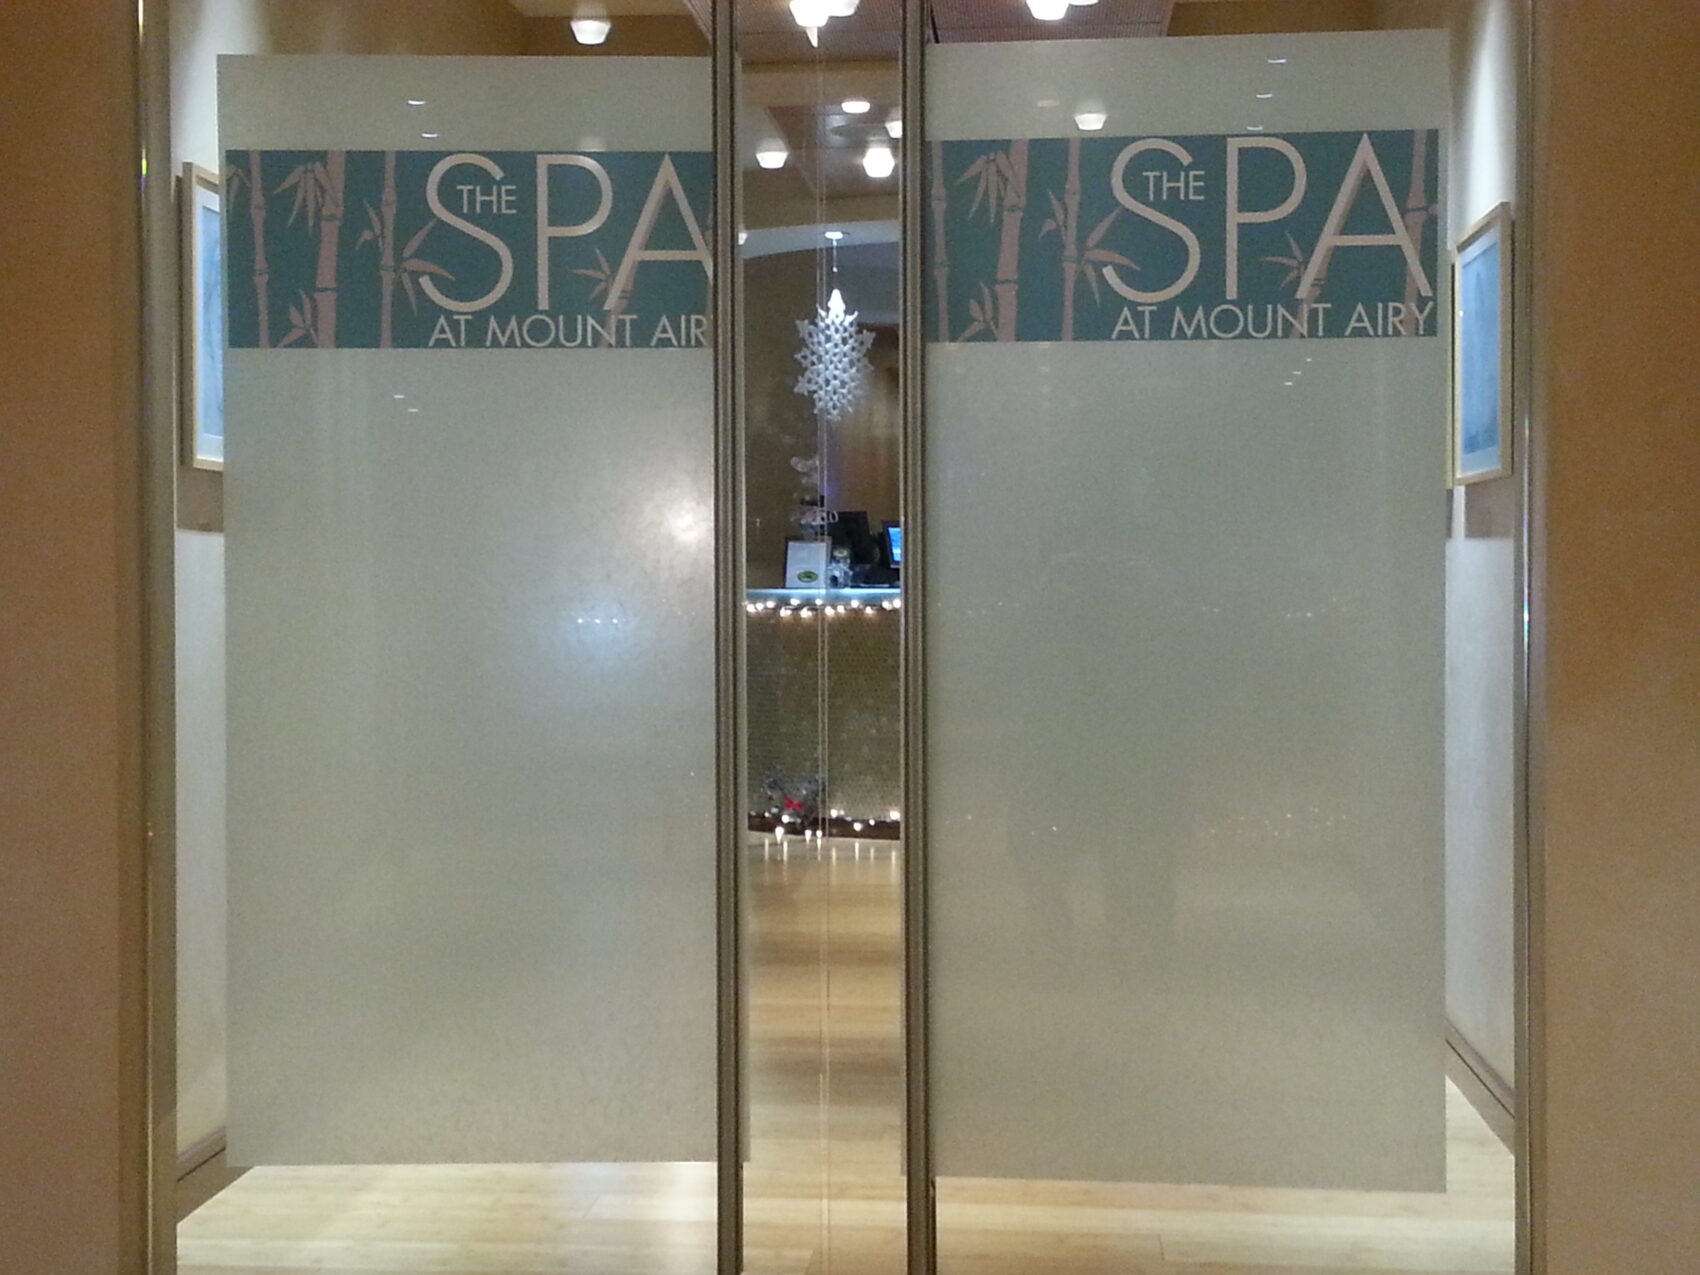 Fasara Decorative Window Films installed at The Spa at Mount Airy by Sun Control Plus